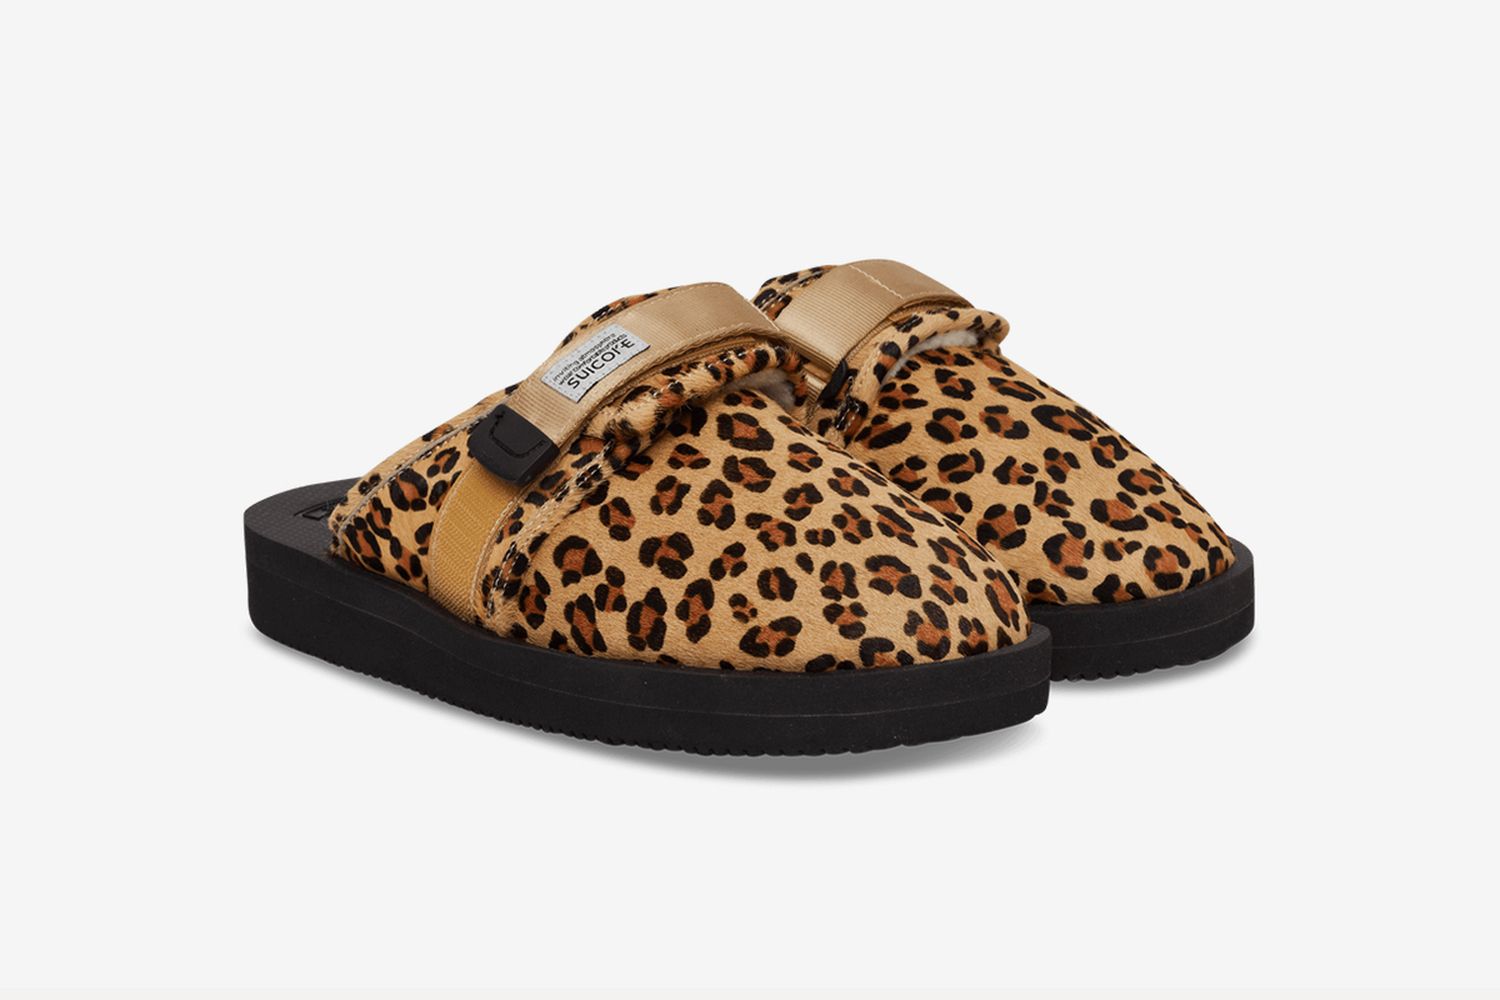 Alternative Holiday Wardrobe: The Best Slippers to Shop